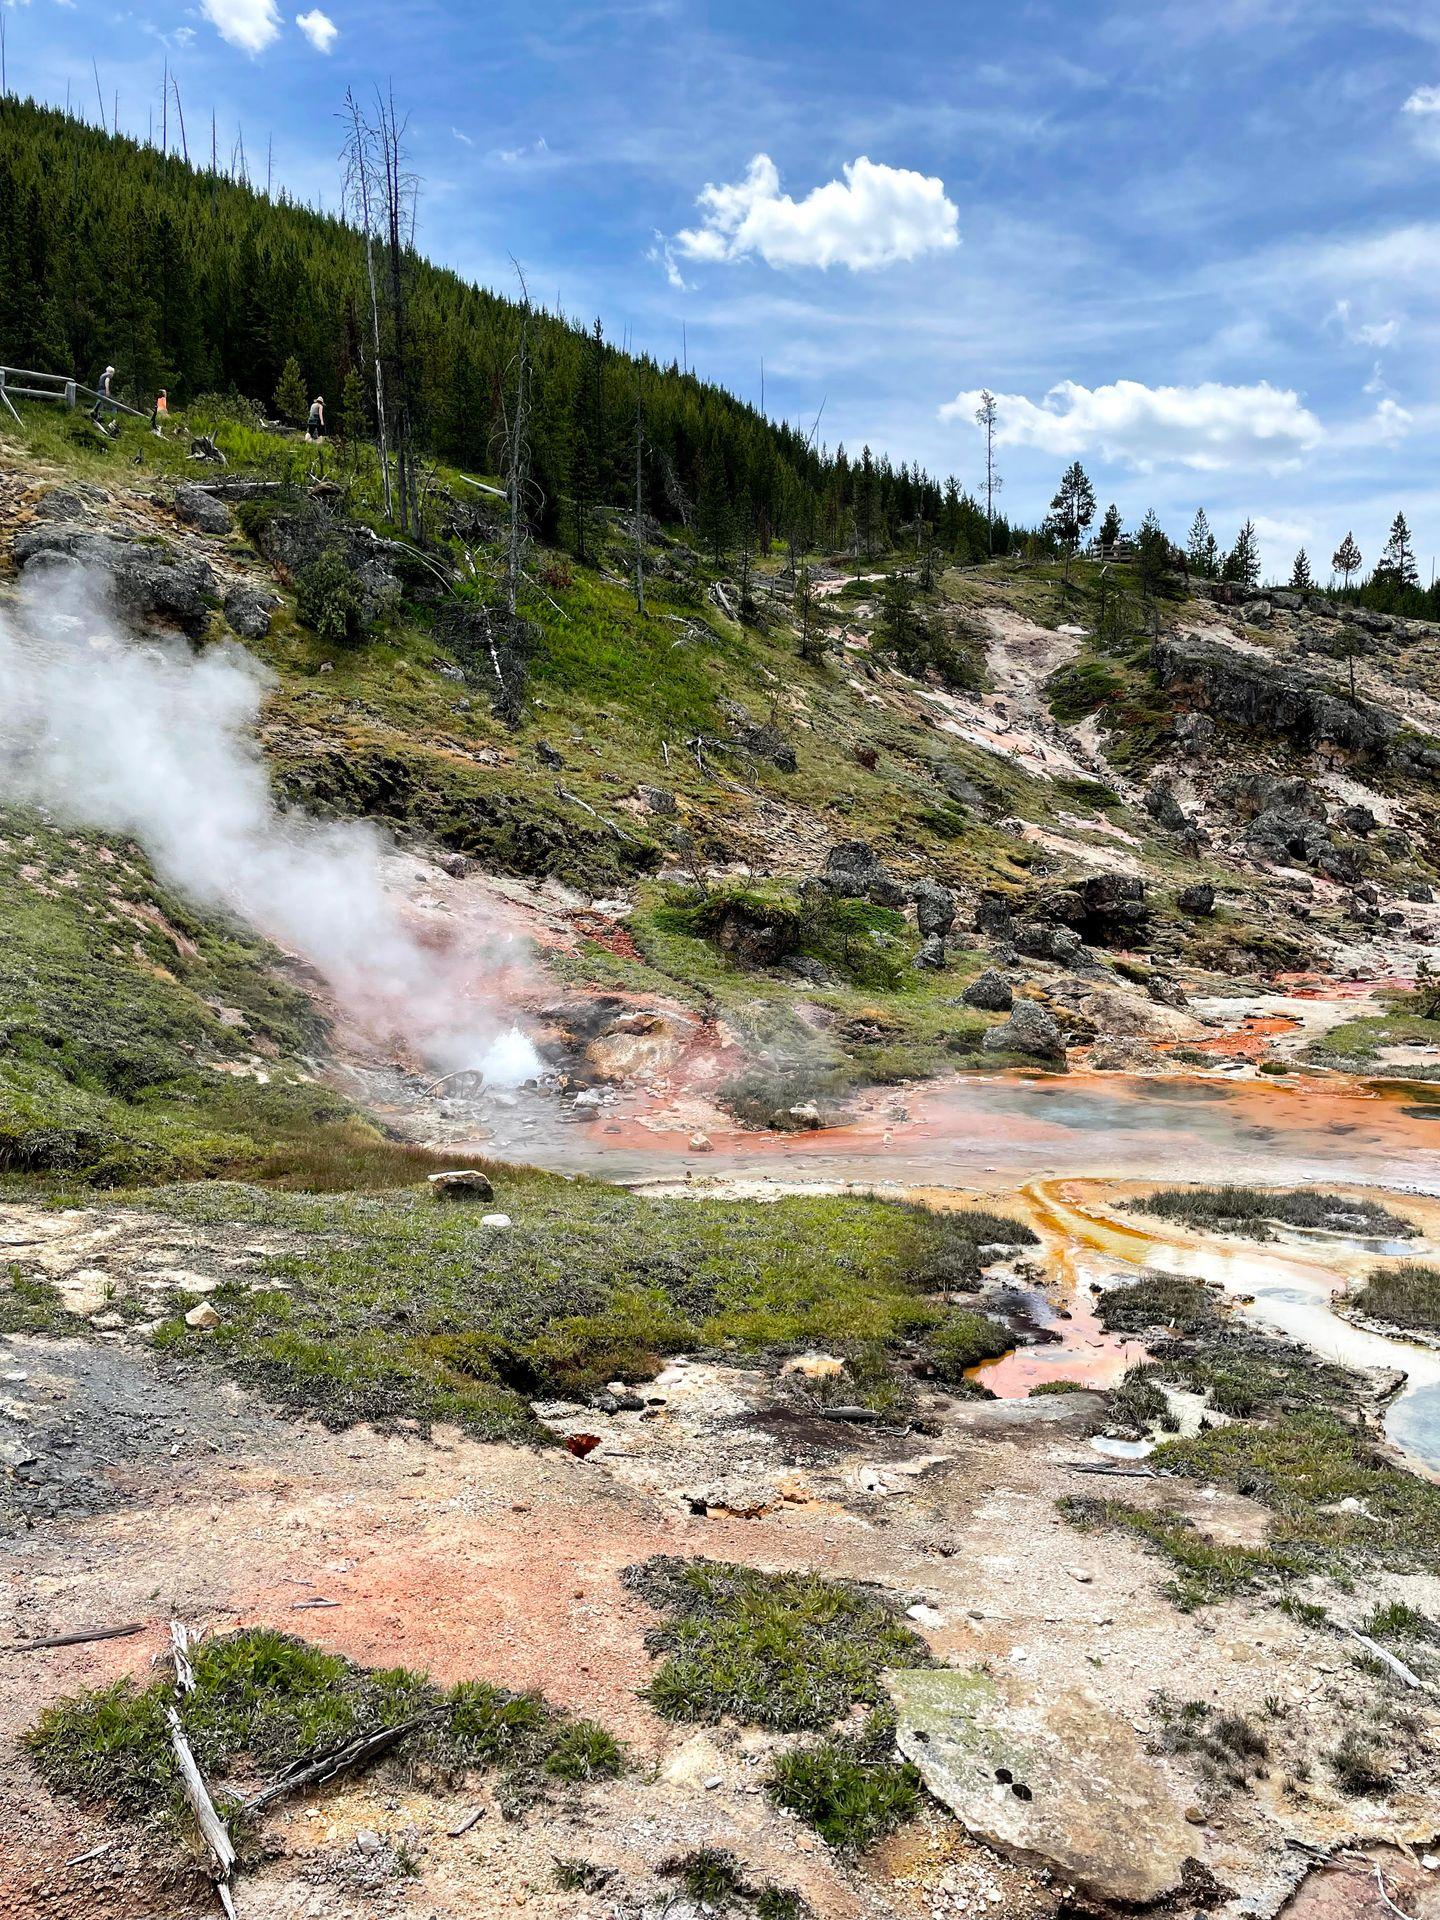 Colorful orange, hot springs on the Artist's Paintpots trail.